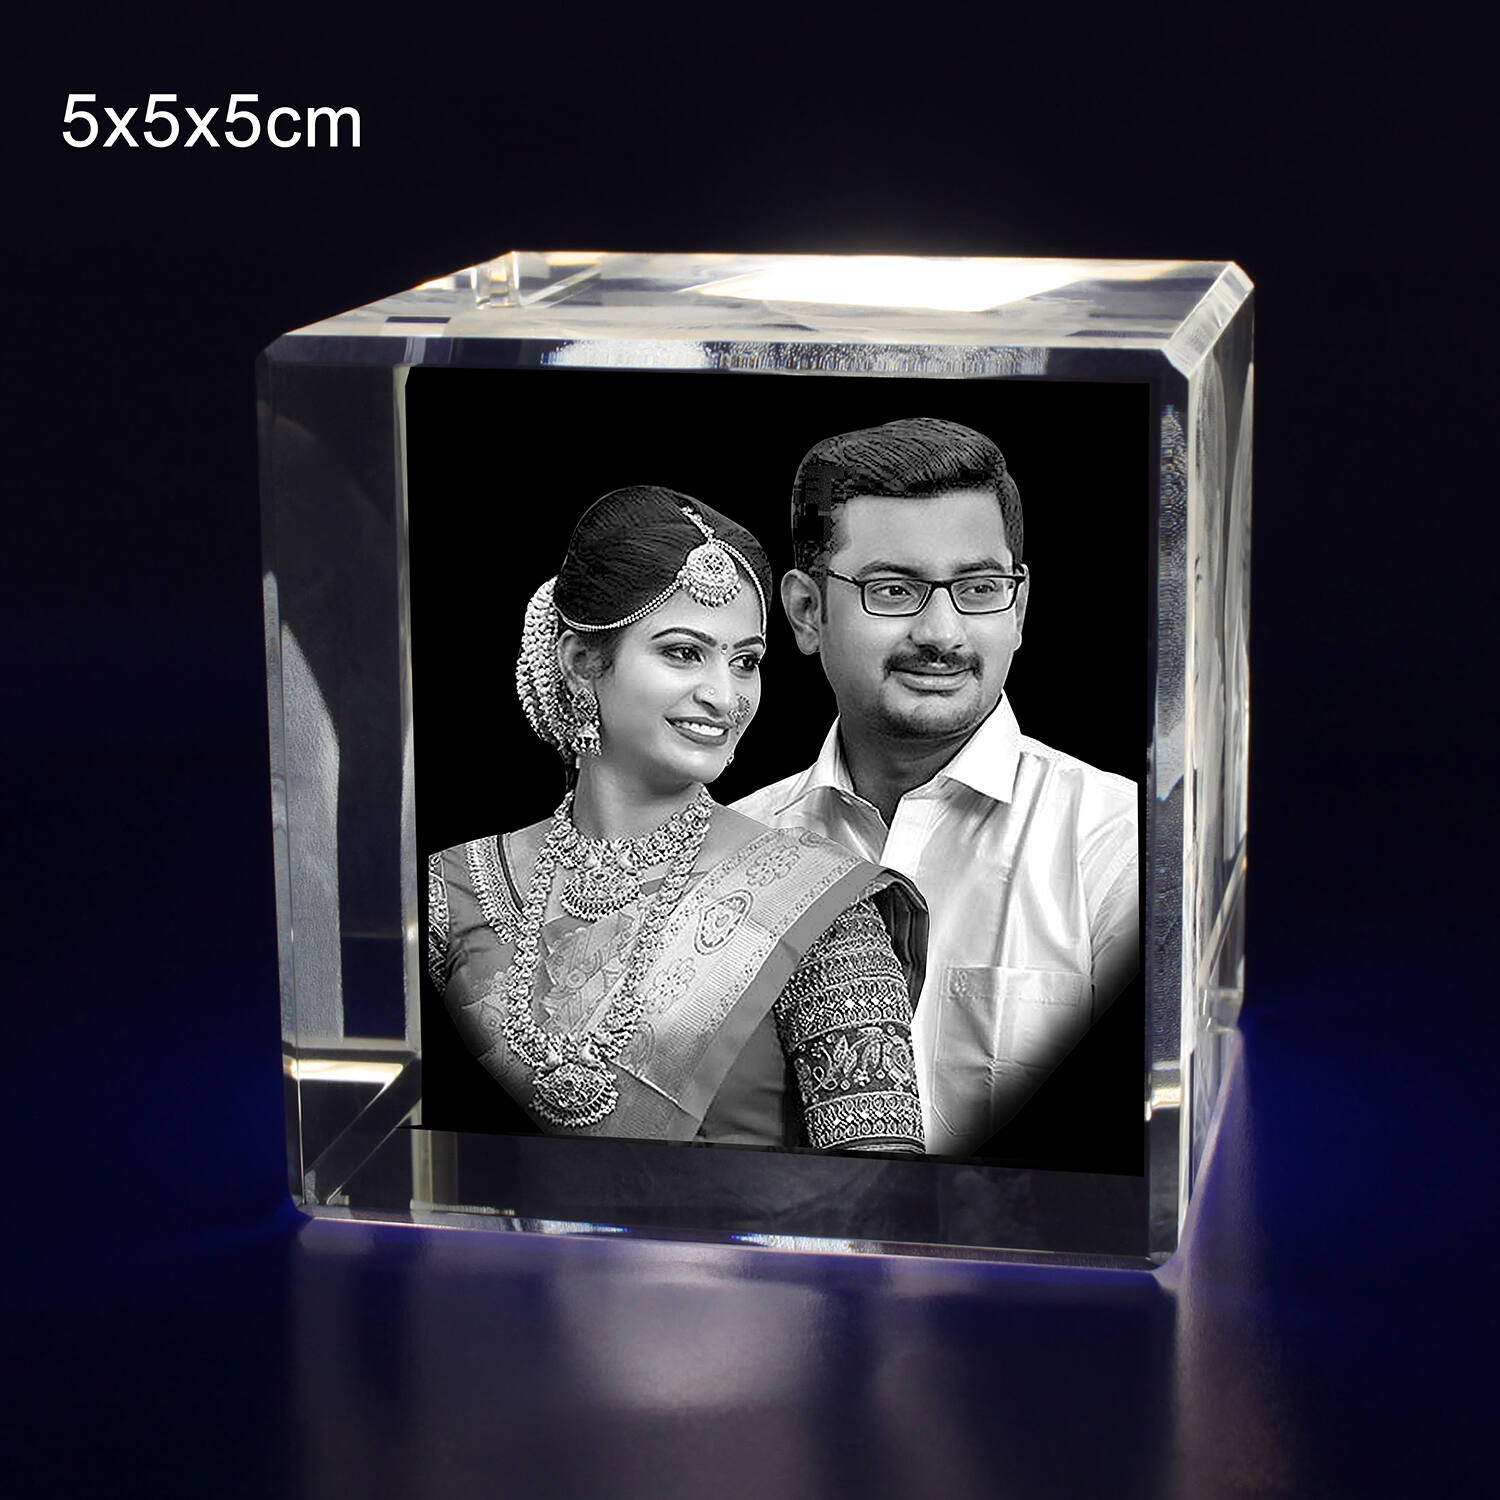 Buy/Send 3D Crystal Cube Online | Personalized 3D Crystal Gifts Delivery  for Him/ Her